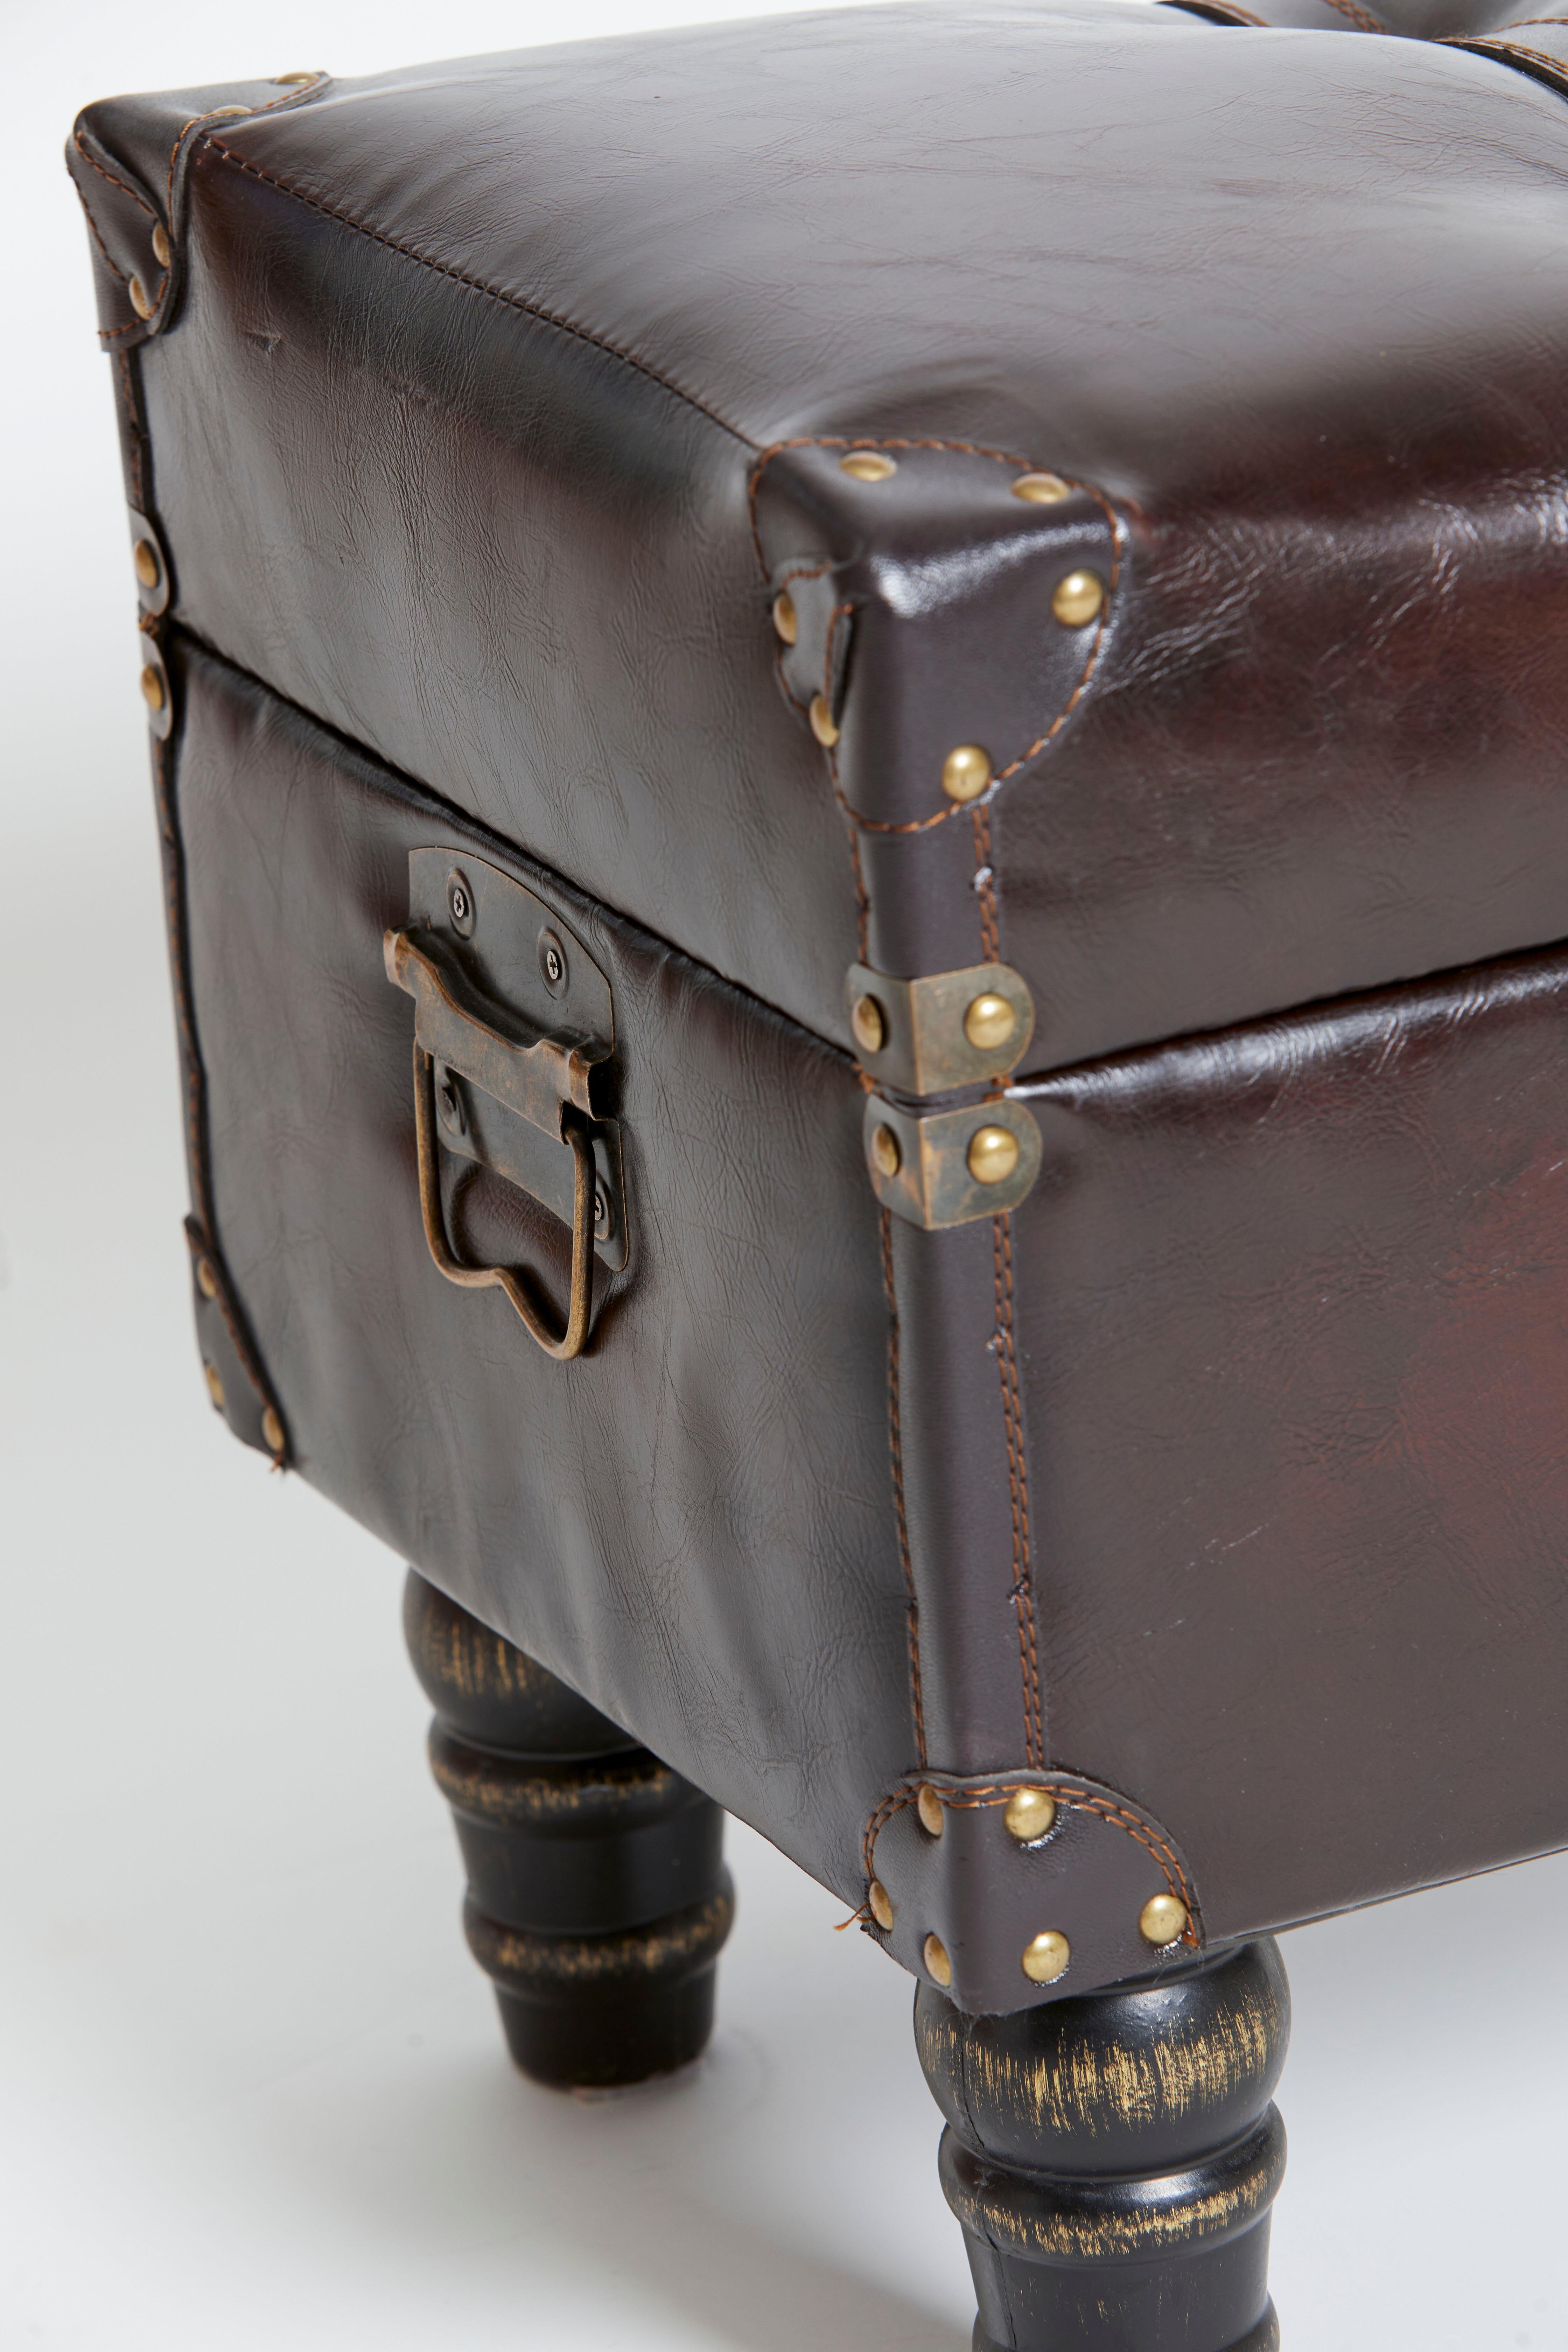 Mid-20th Century Italian 1950's Pair of Leather & Oak Stool Trunks with Side Handle & Buckle